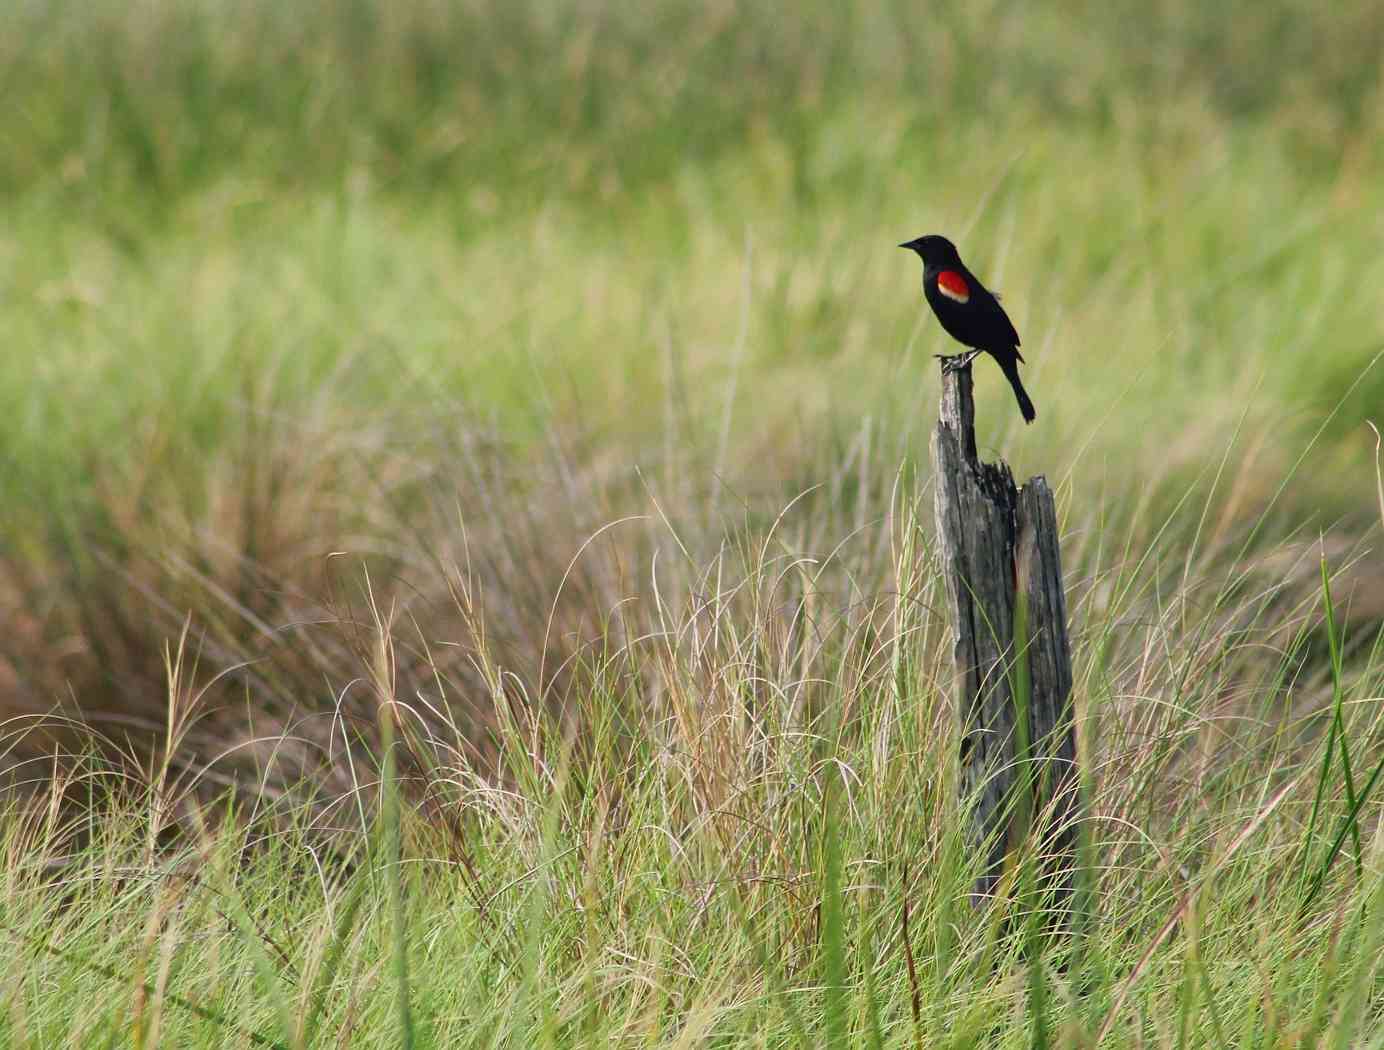 Red-winged blackbird perched on a stump